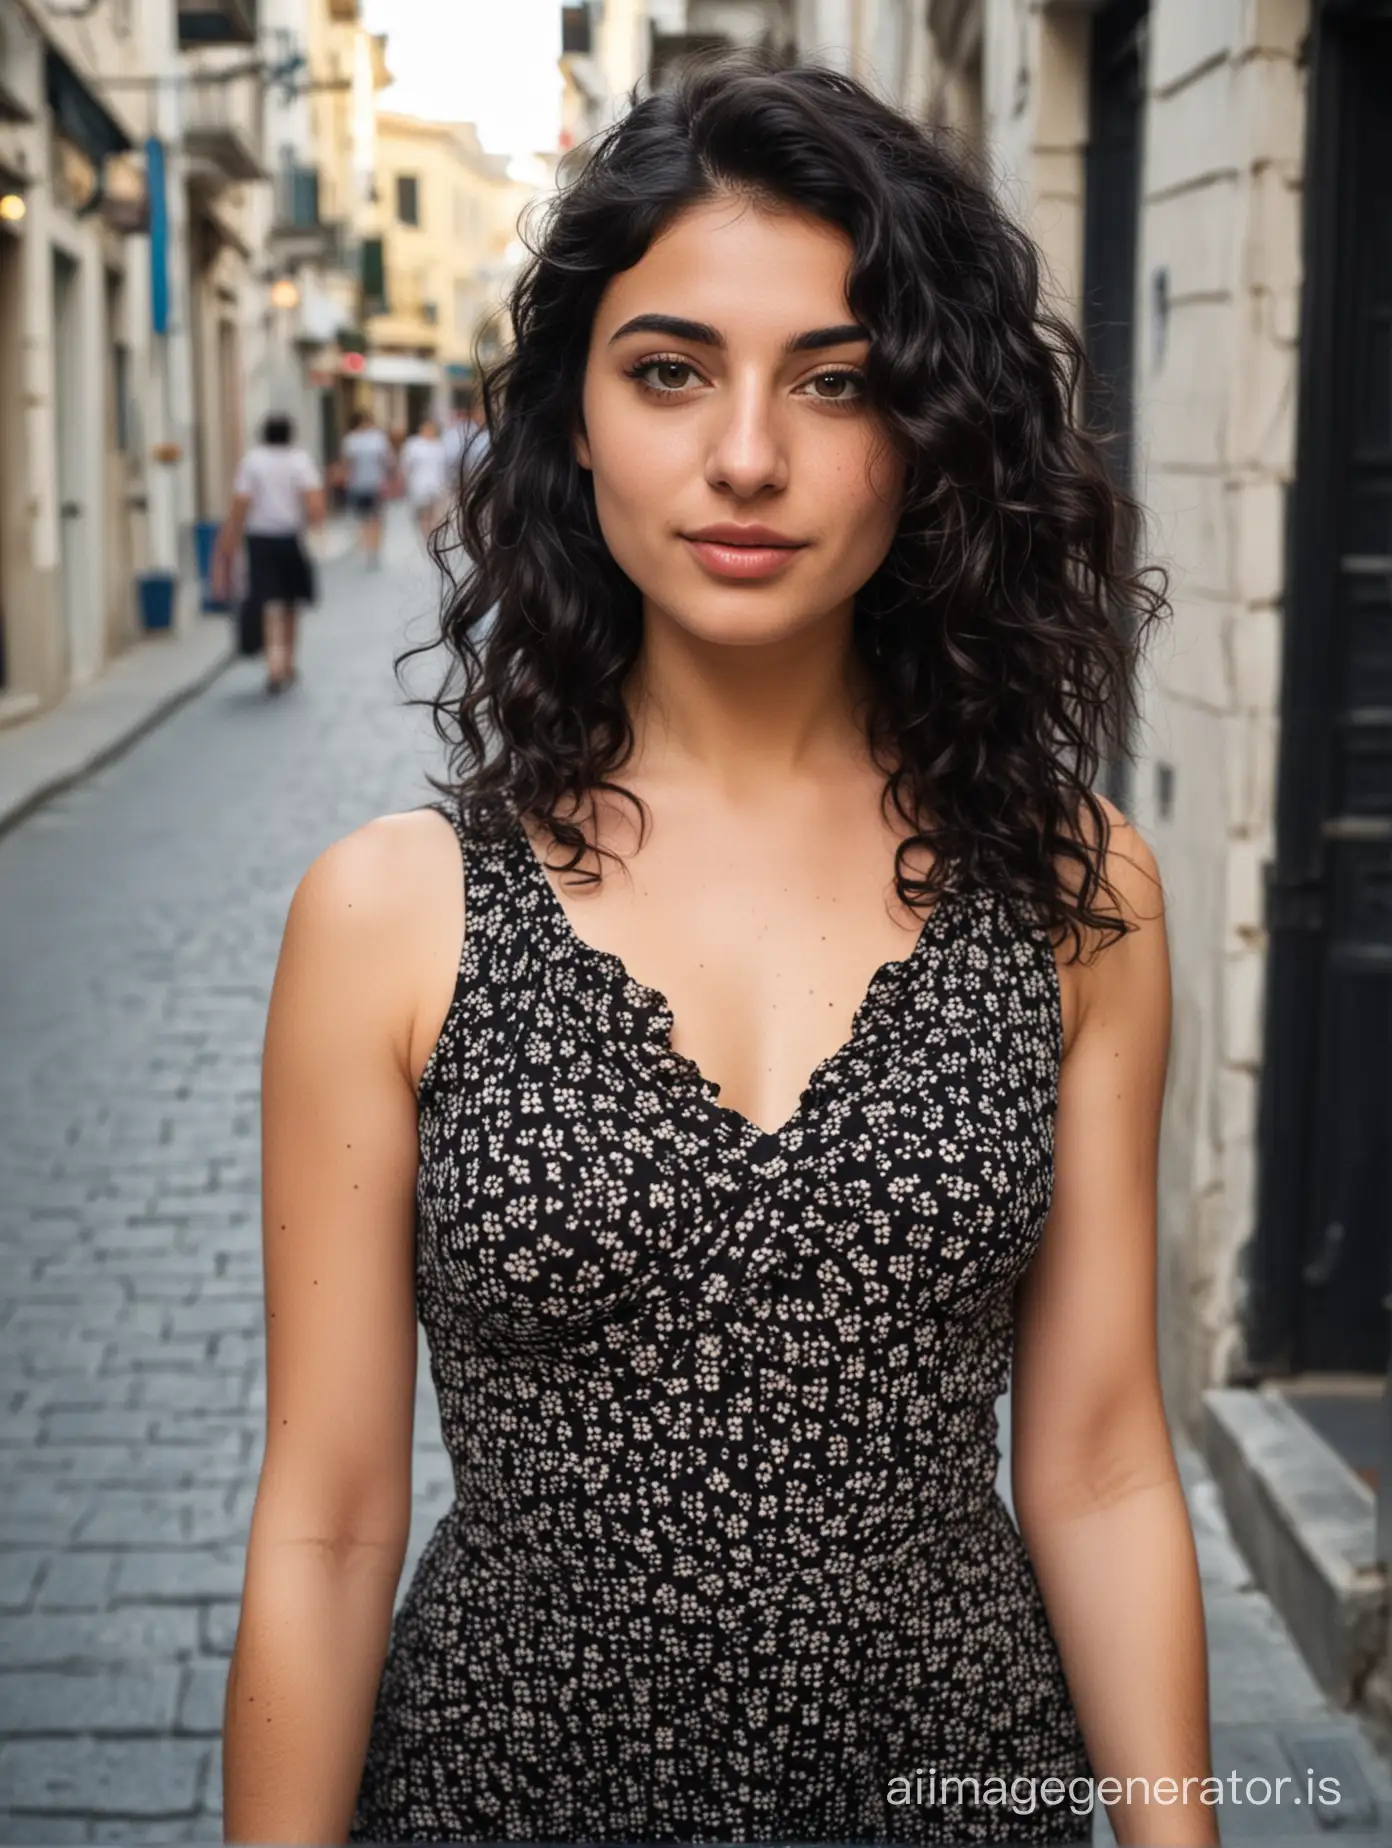 a photo of andriana a 22 yo greek girl with black wavy hair, with skin moles and hairy mustache, at greek street, looking away, dress, shaky camera